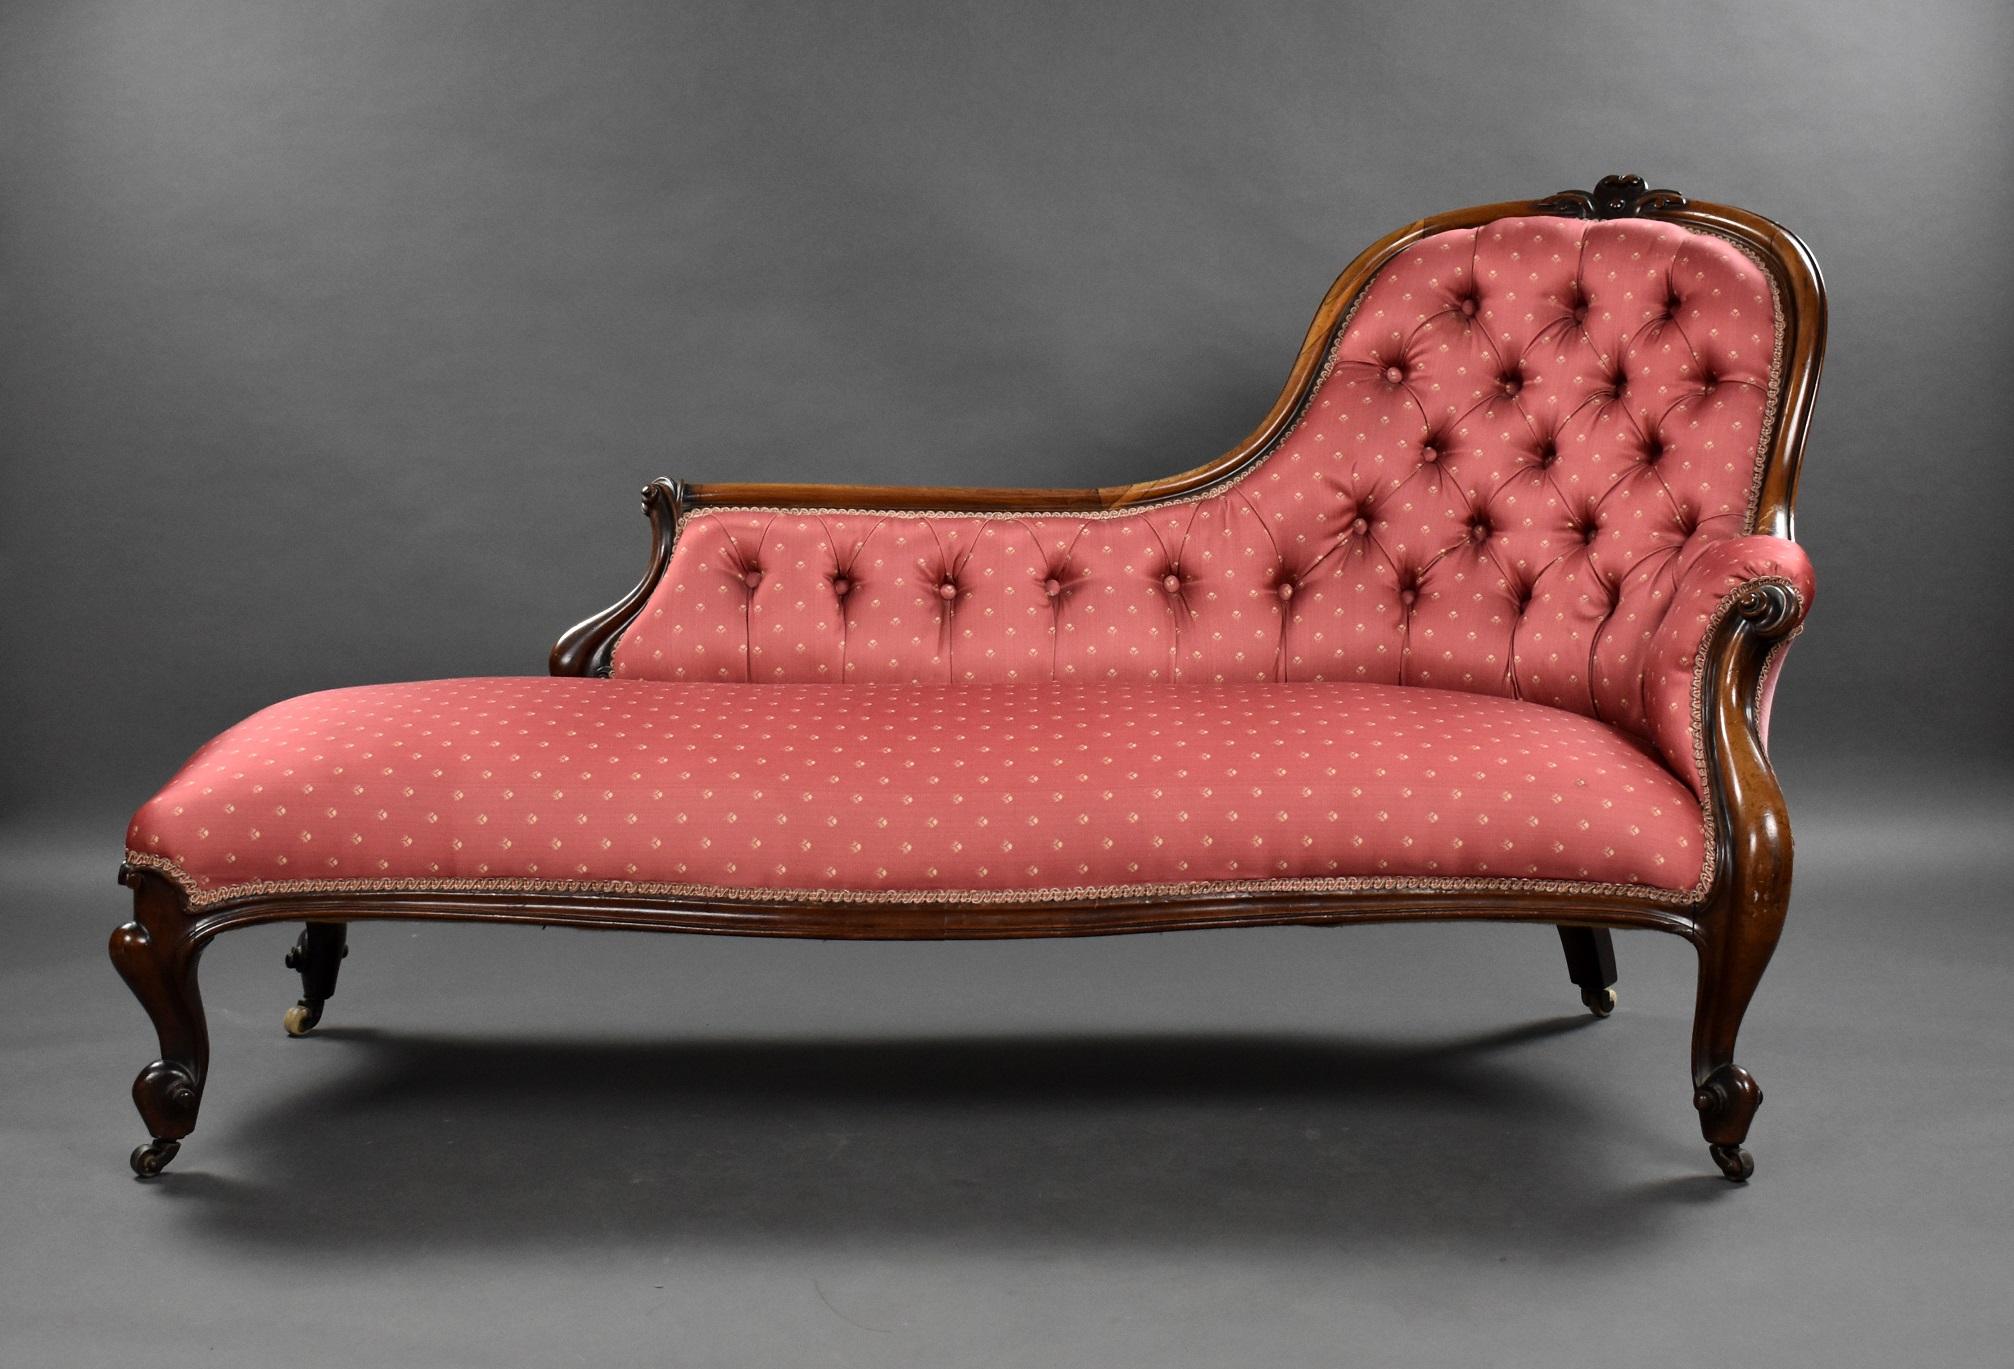 Victorian Rosewood chaise lounge in good condition with a shaped crest rail with floral carved pediment and scrolled terminals. The chaise has a buttoned back, upholstered in a patterned pale red silk, raised on scrolled cabriole supports